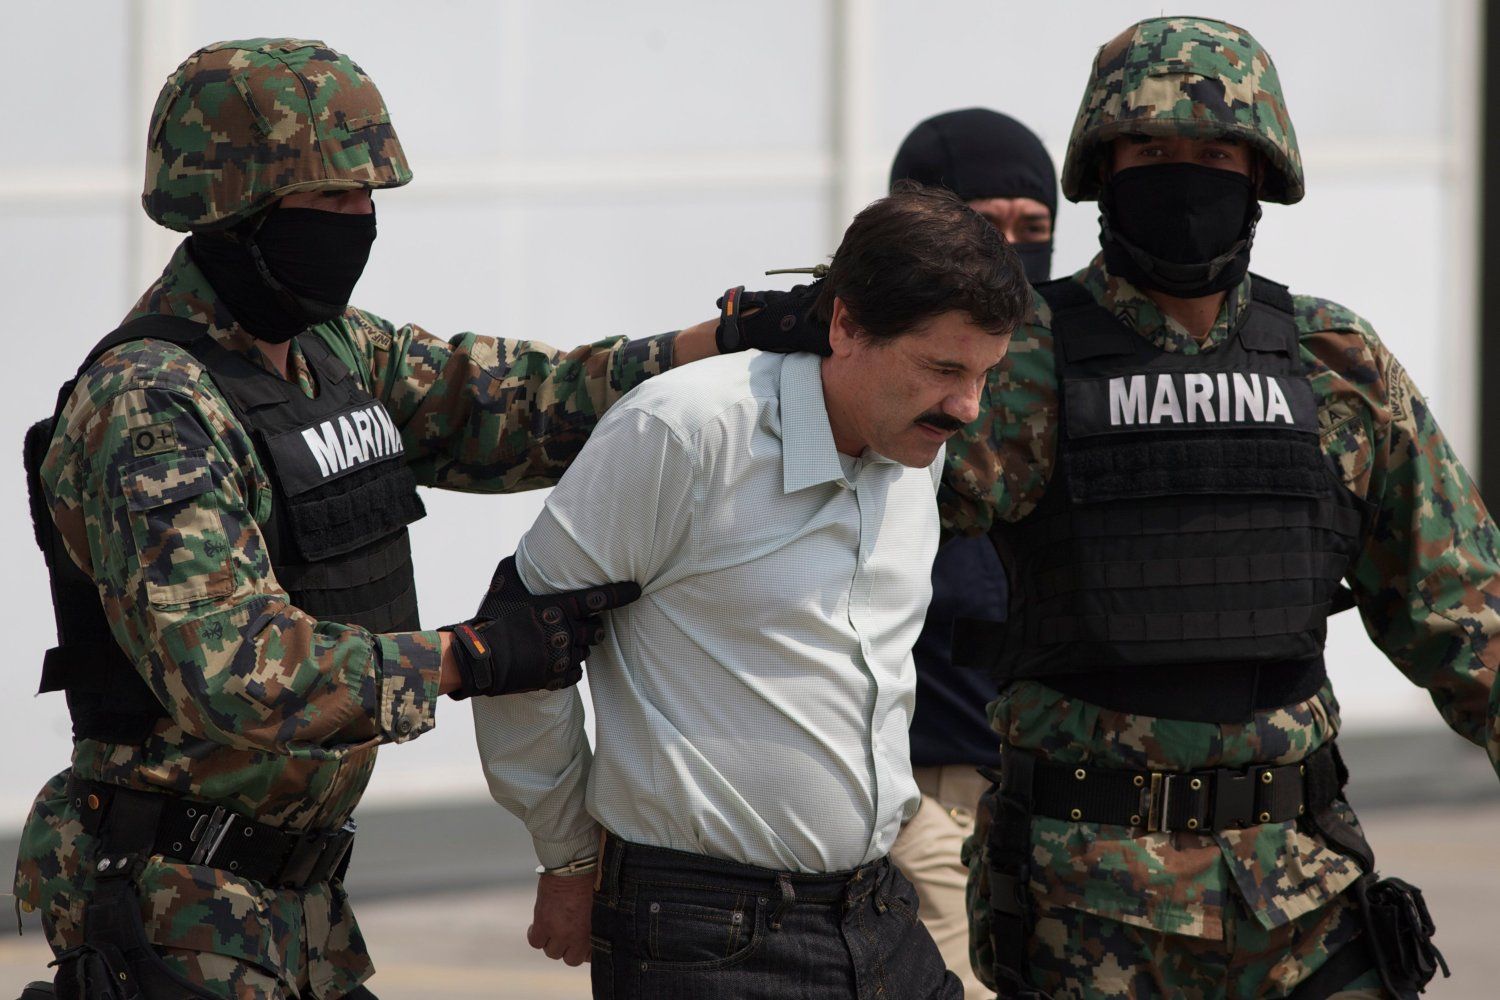 El Chapo Guzmán plans vengeance: Prison escapee and Sinaloa Cartel leader alters decision and wants to fight the law again